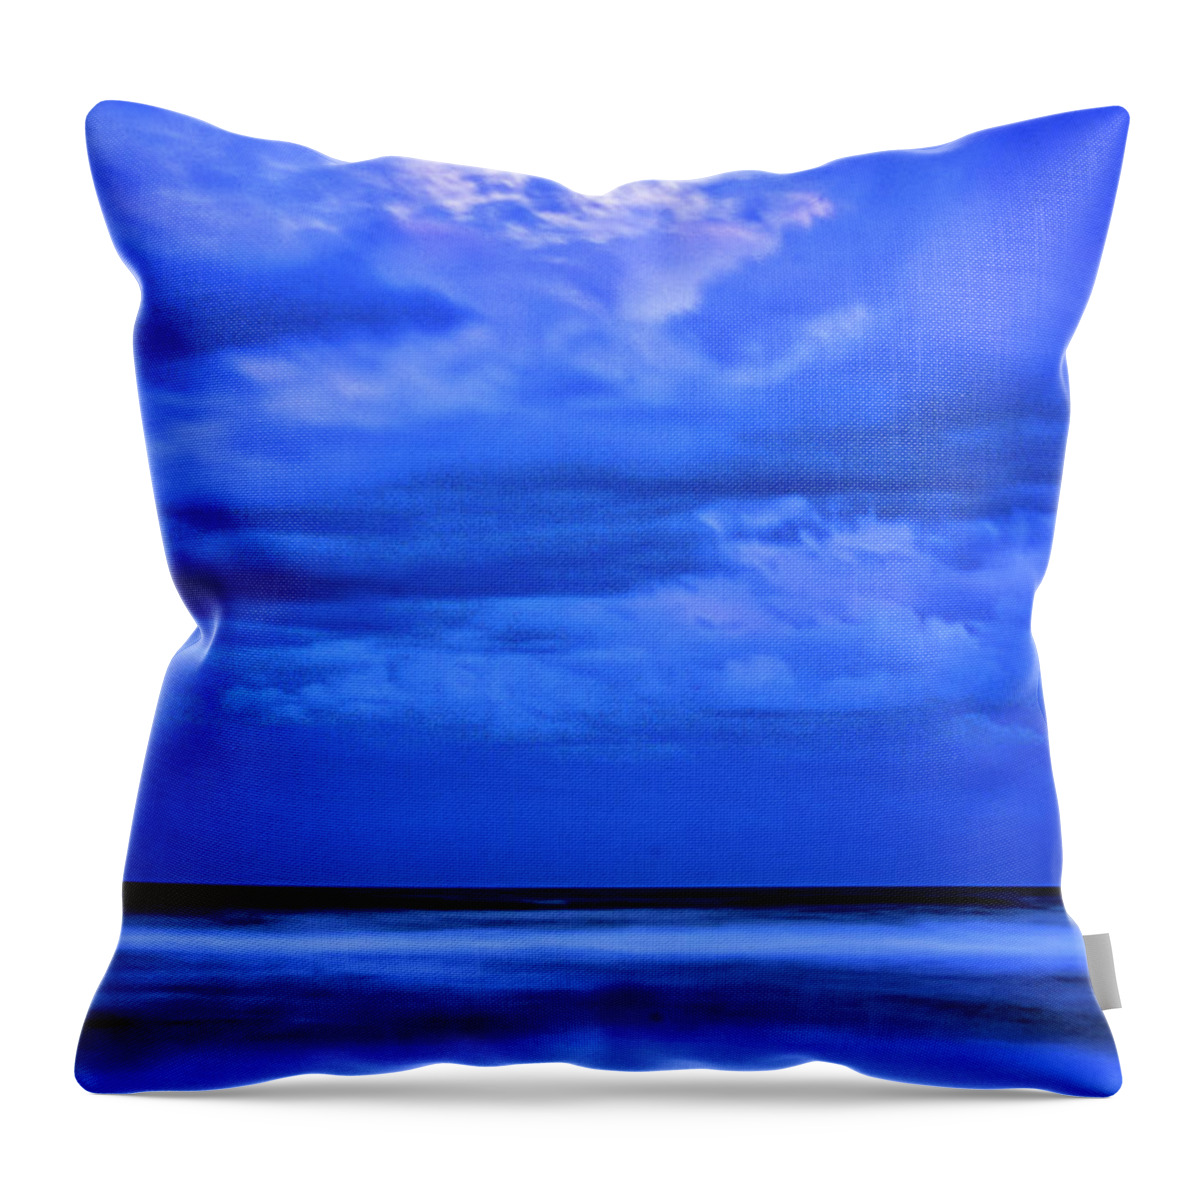 Yard Animals Throw Pillow featuring the photograph Moon Over The Ocean by Tom Singleton